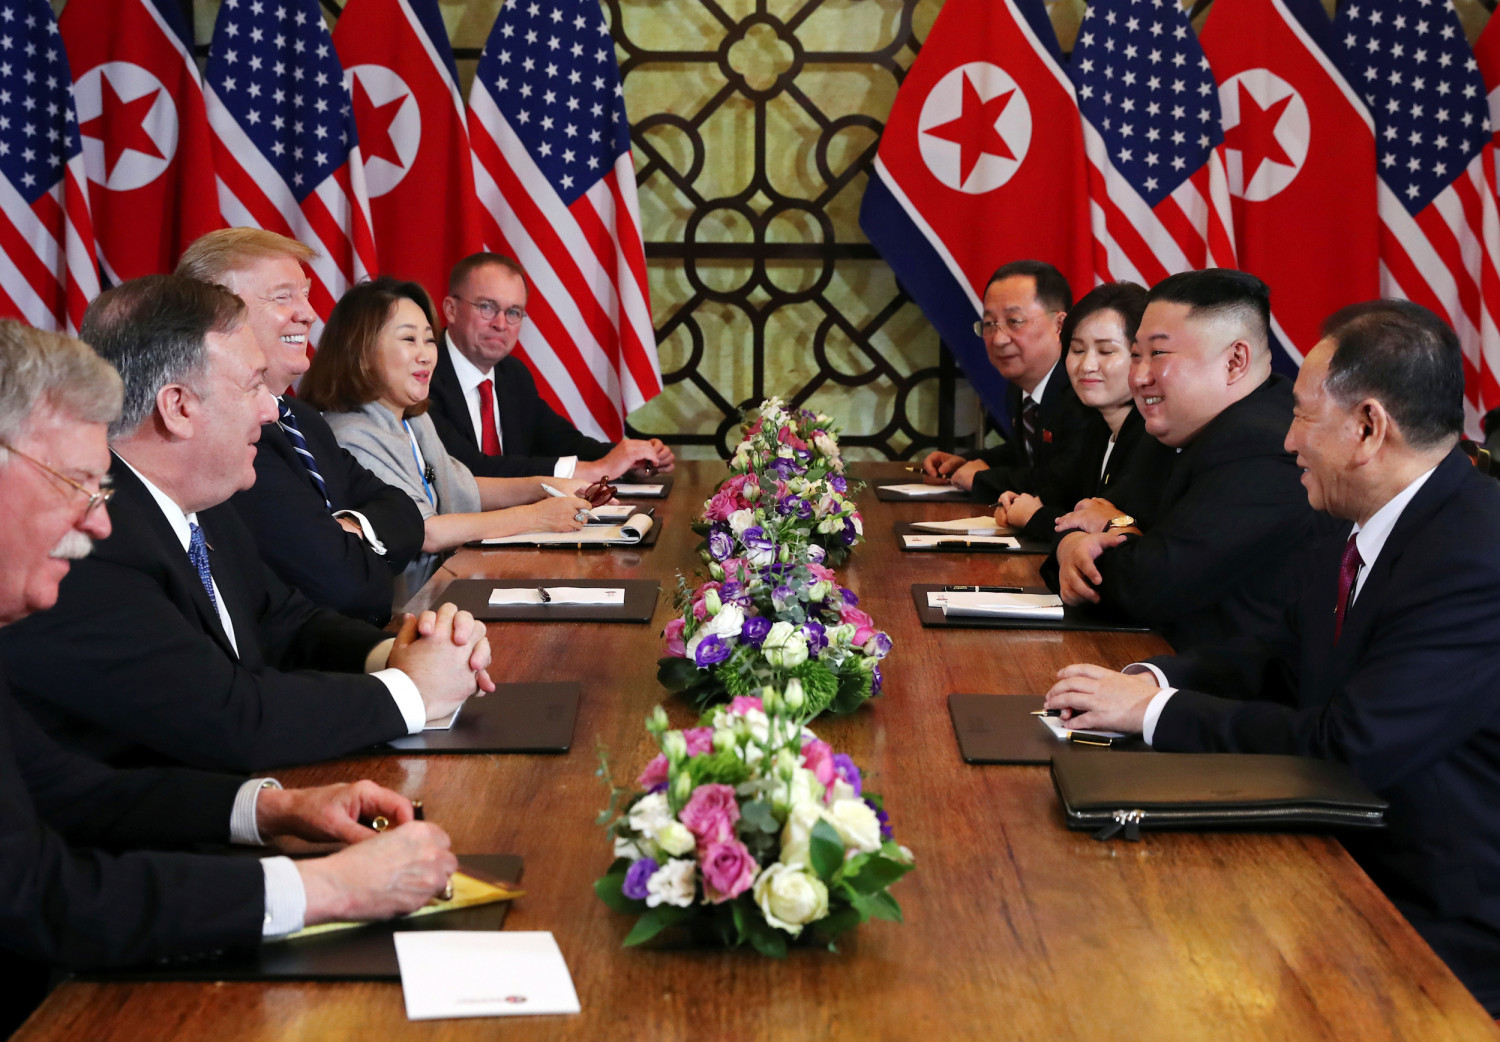 Trump-Kim Summit Ends With No Deal on Denuclearization